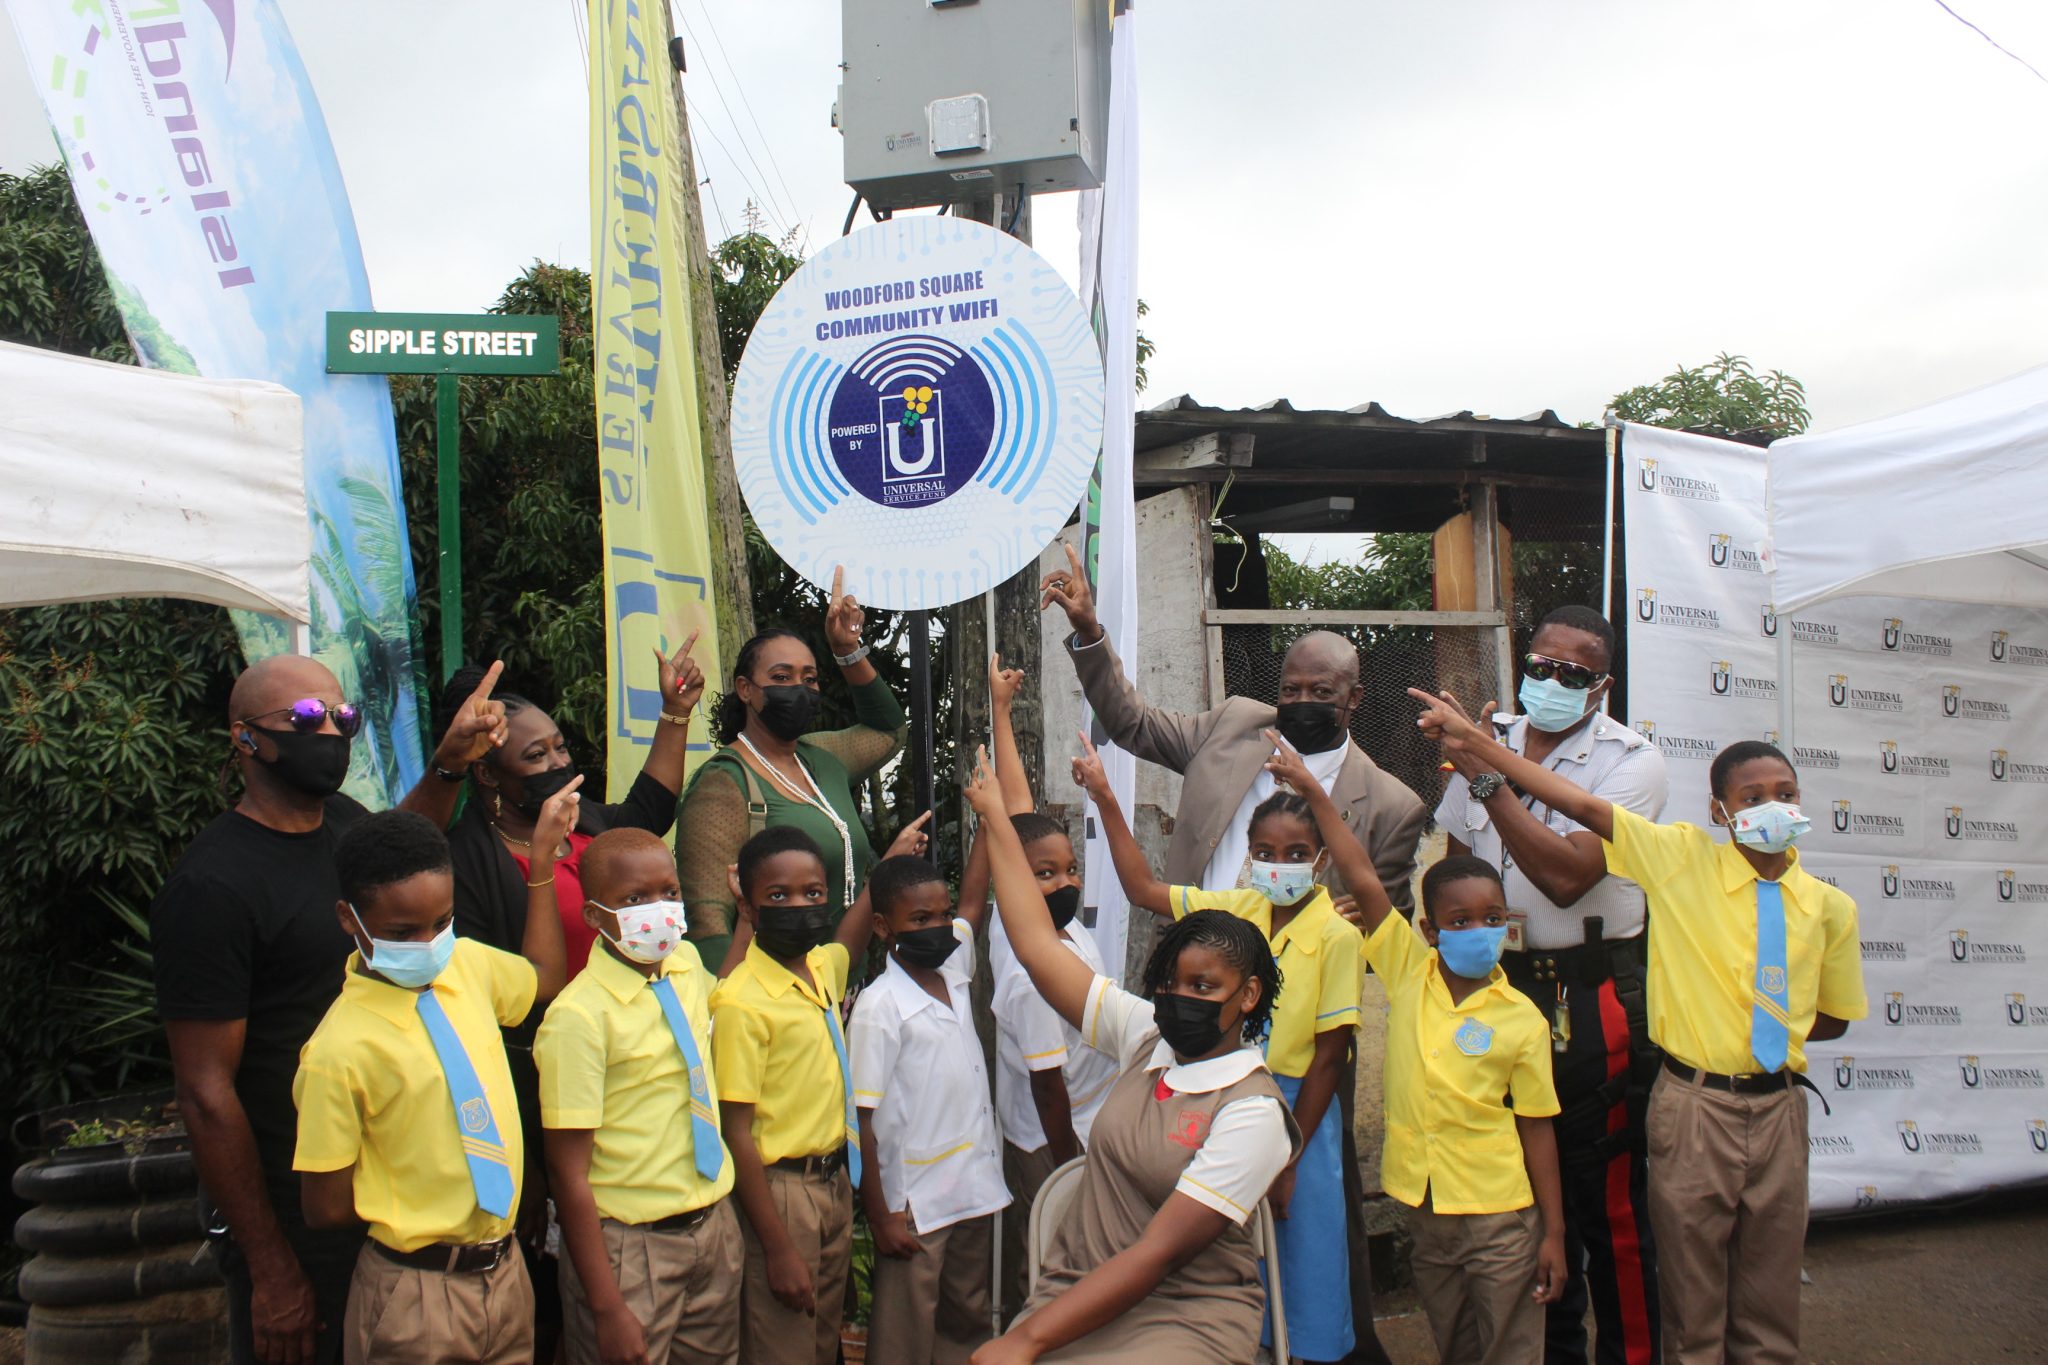 Jamaicans Urged To Use Free Wi-Fi Service To Transform Lives